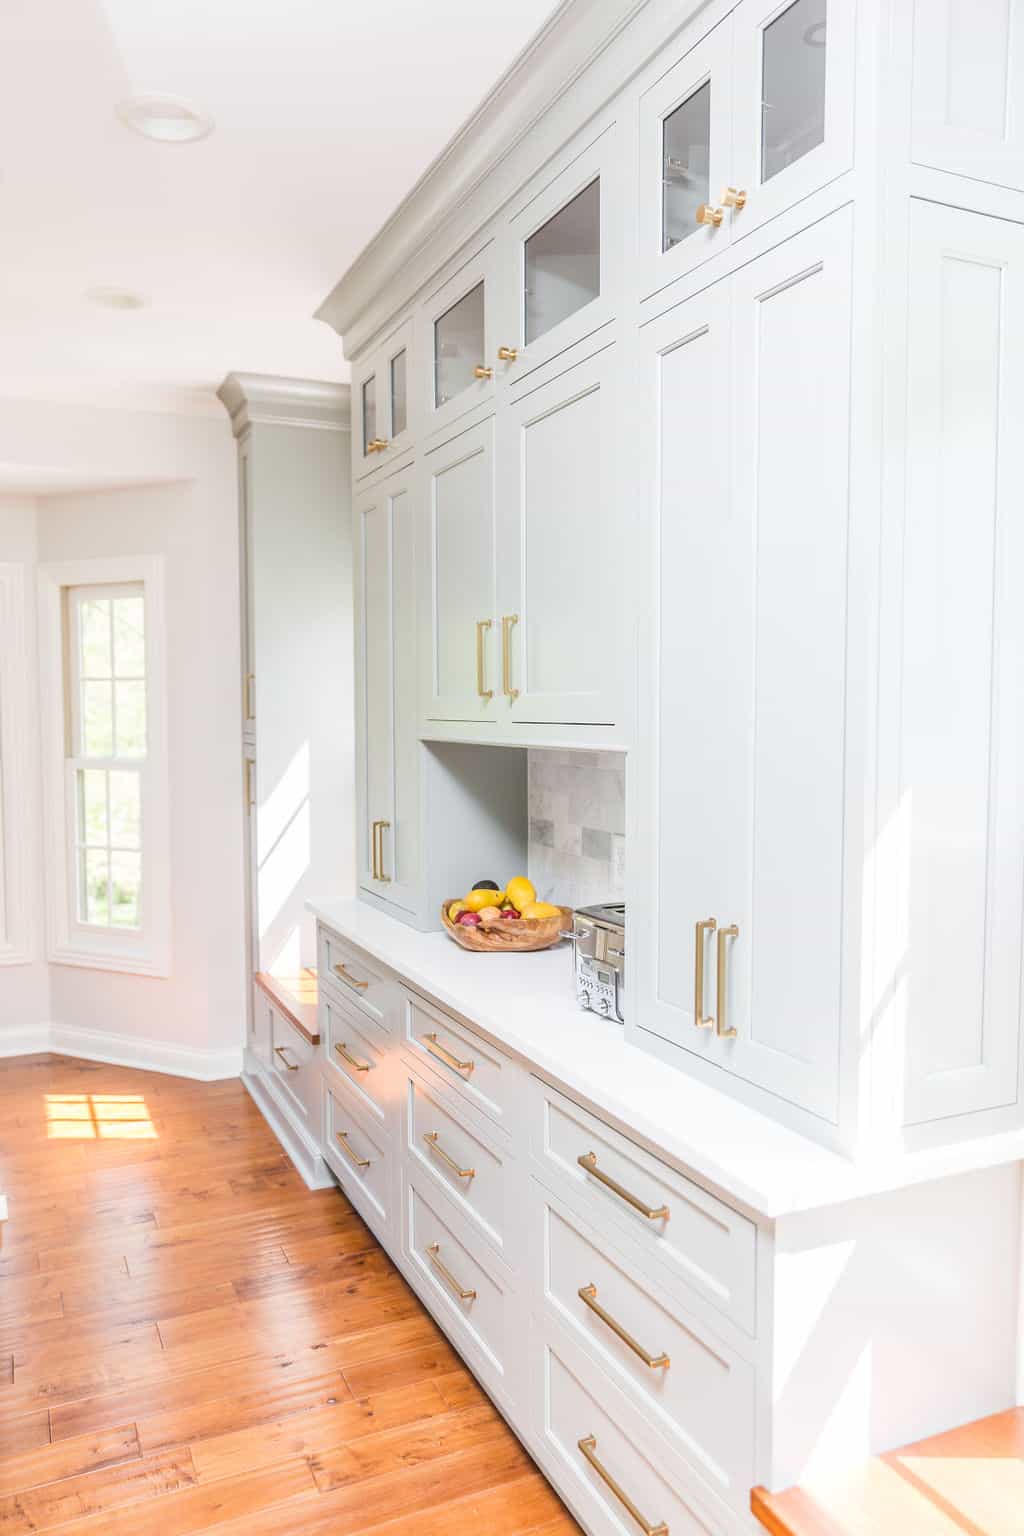 Nicholas Design Build | Remodel a kitchen with white cabinets and hardwood floors.